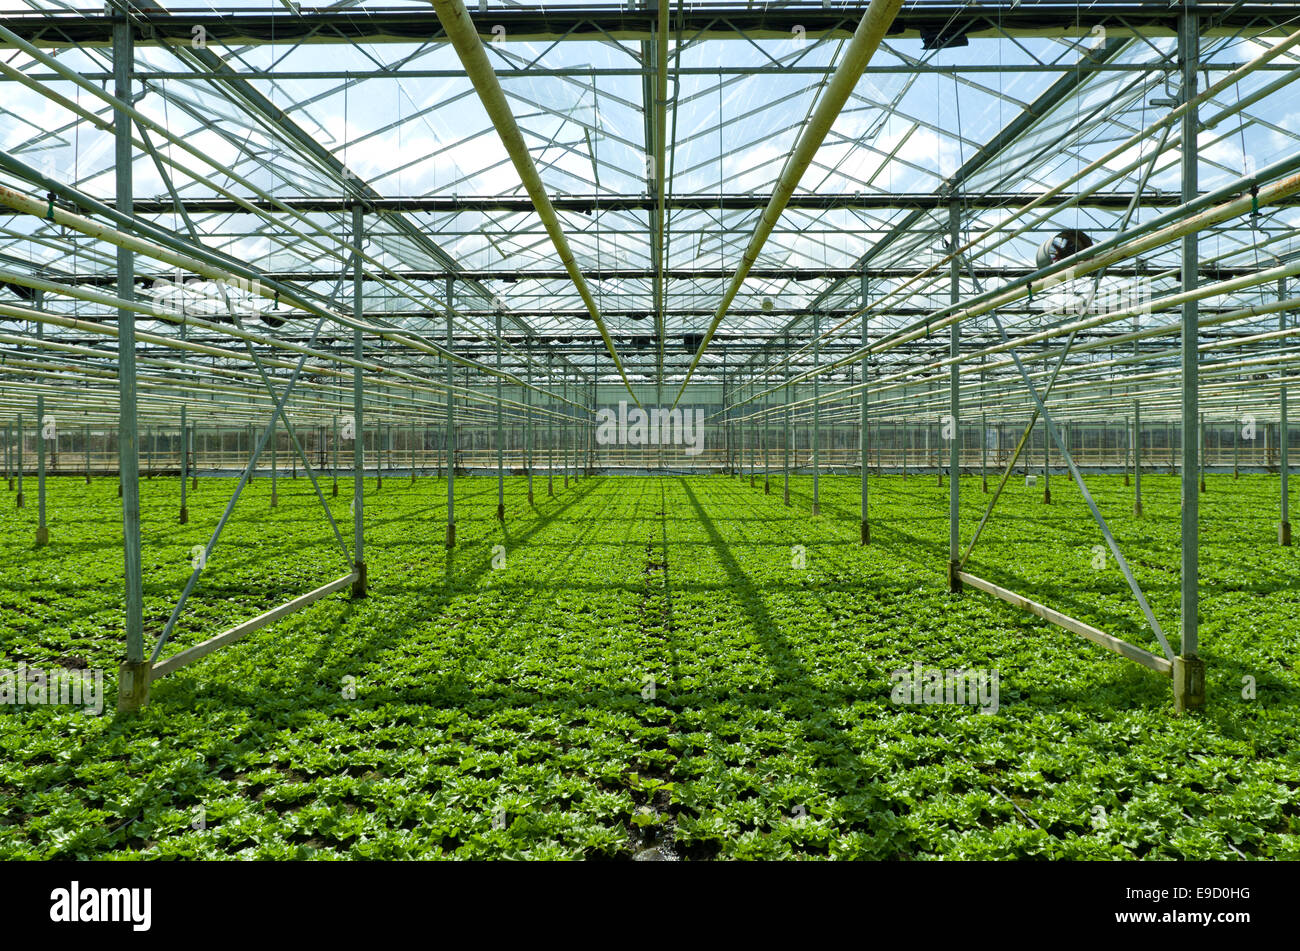 cultivation of endive in a commercial greenhouse in the netherlands Stock Photo